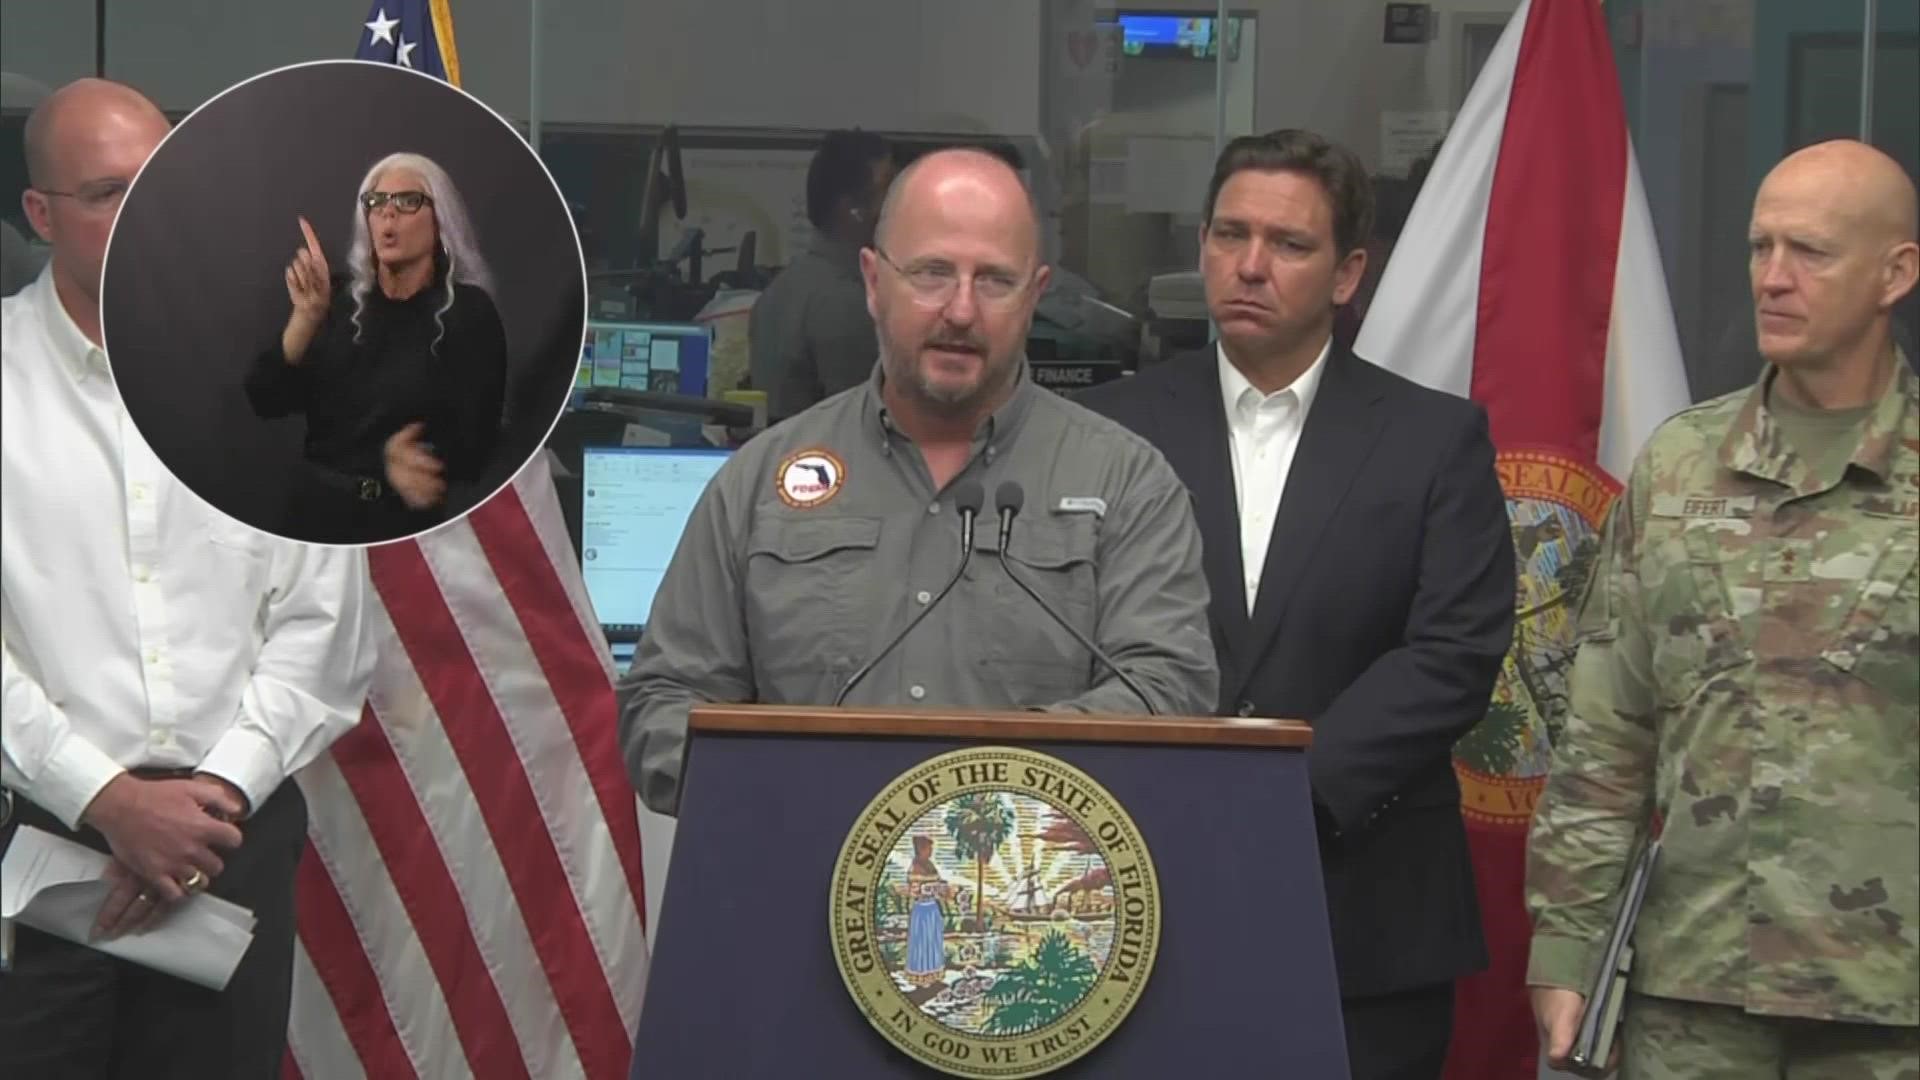 Gov. Ron DeSantis provided an update on Florida preparations ahead of anticipated impacts from Hurricane Ian.